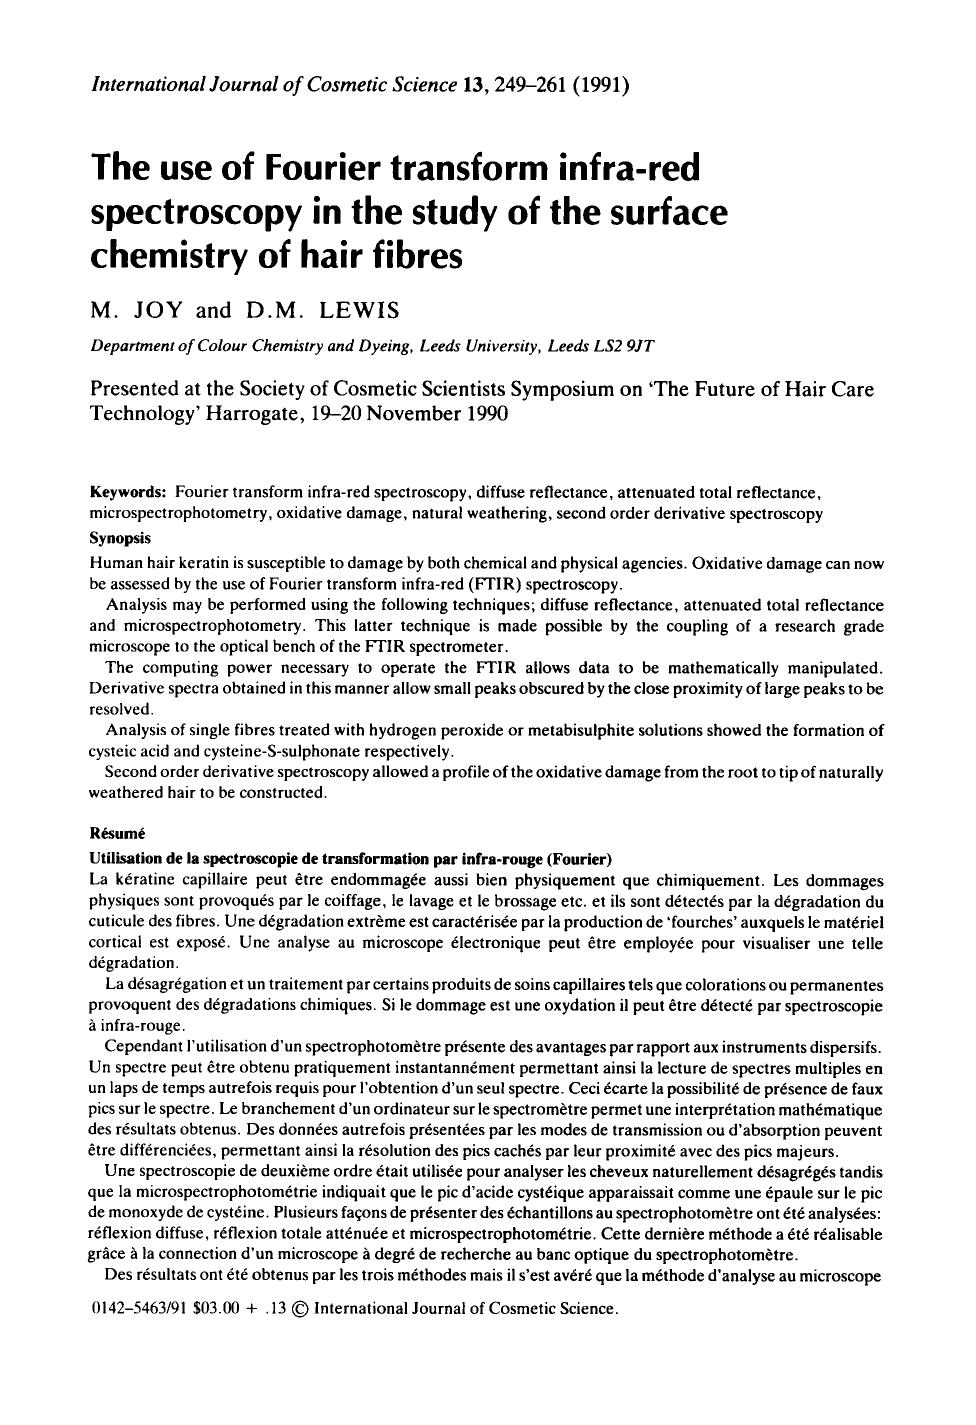 The use of Fourier transform infra-red spectroscopy in the study of the surface chemistry of hair fibres by Unknown